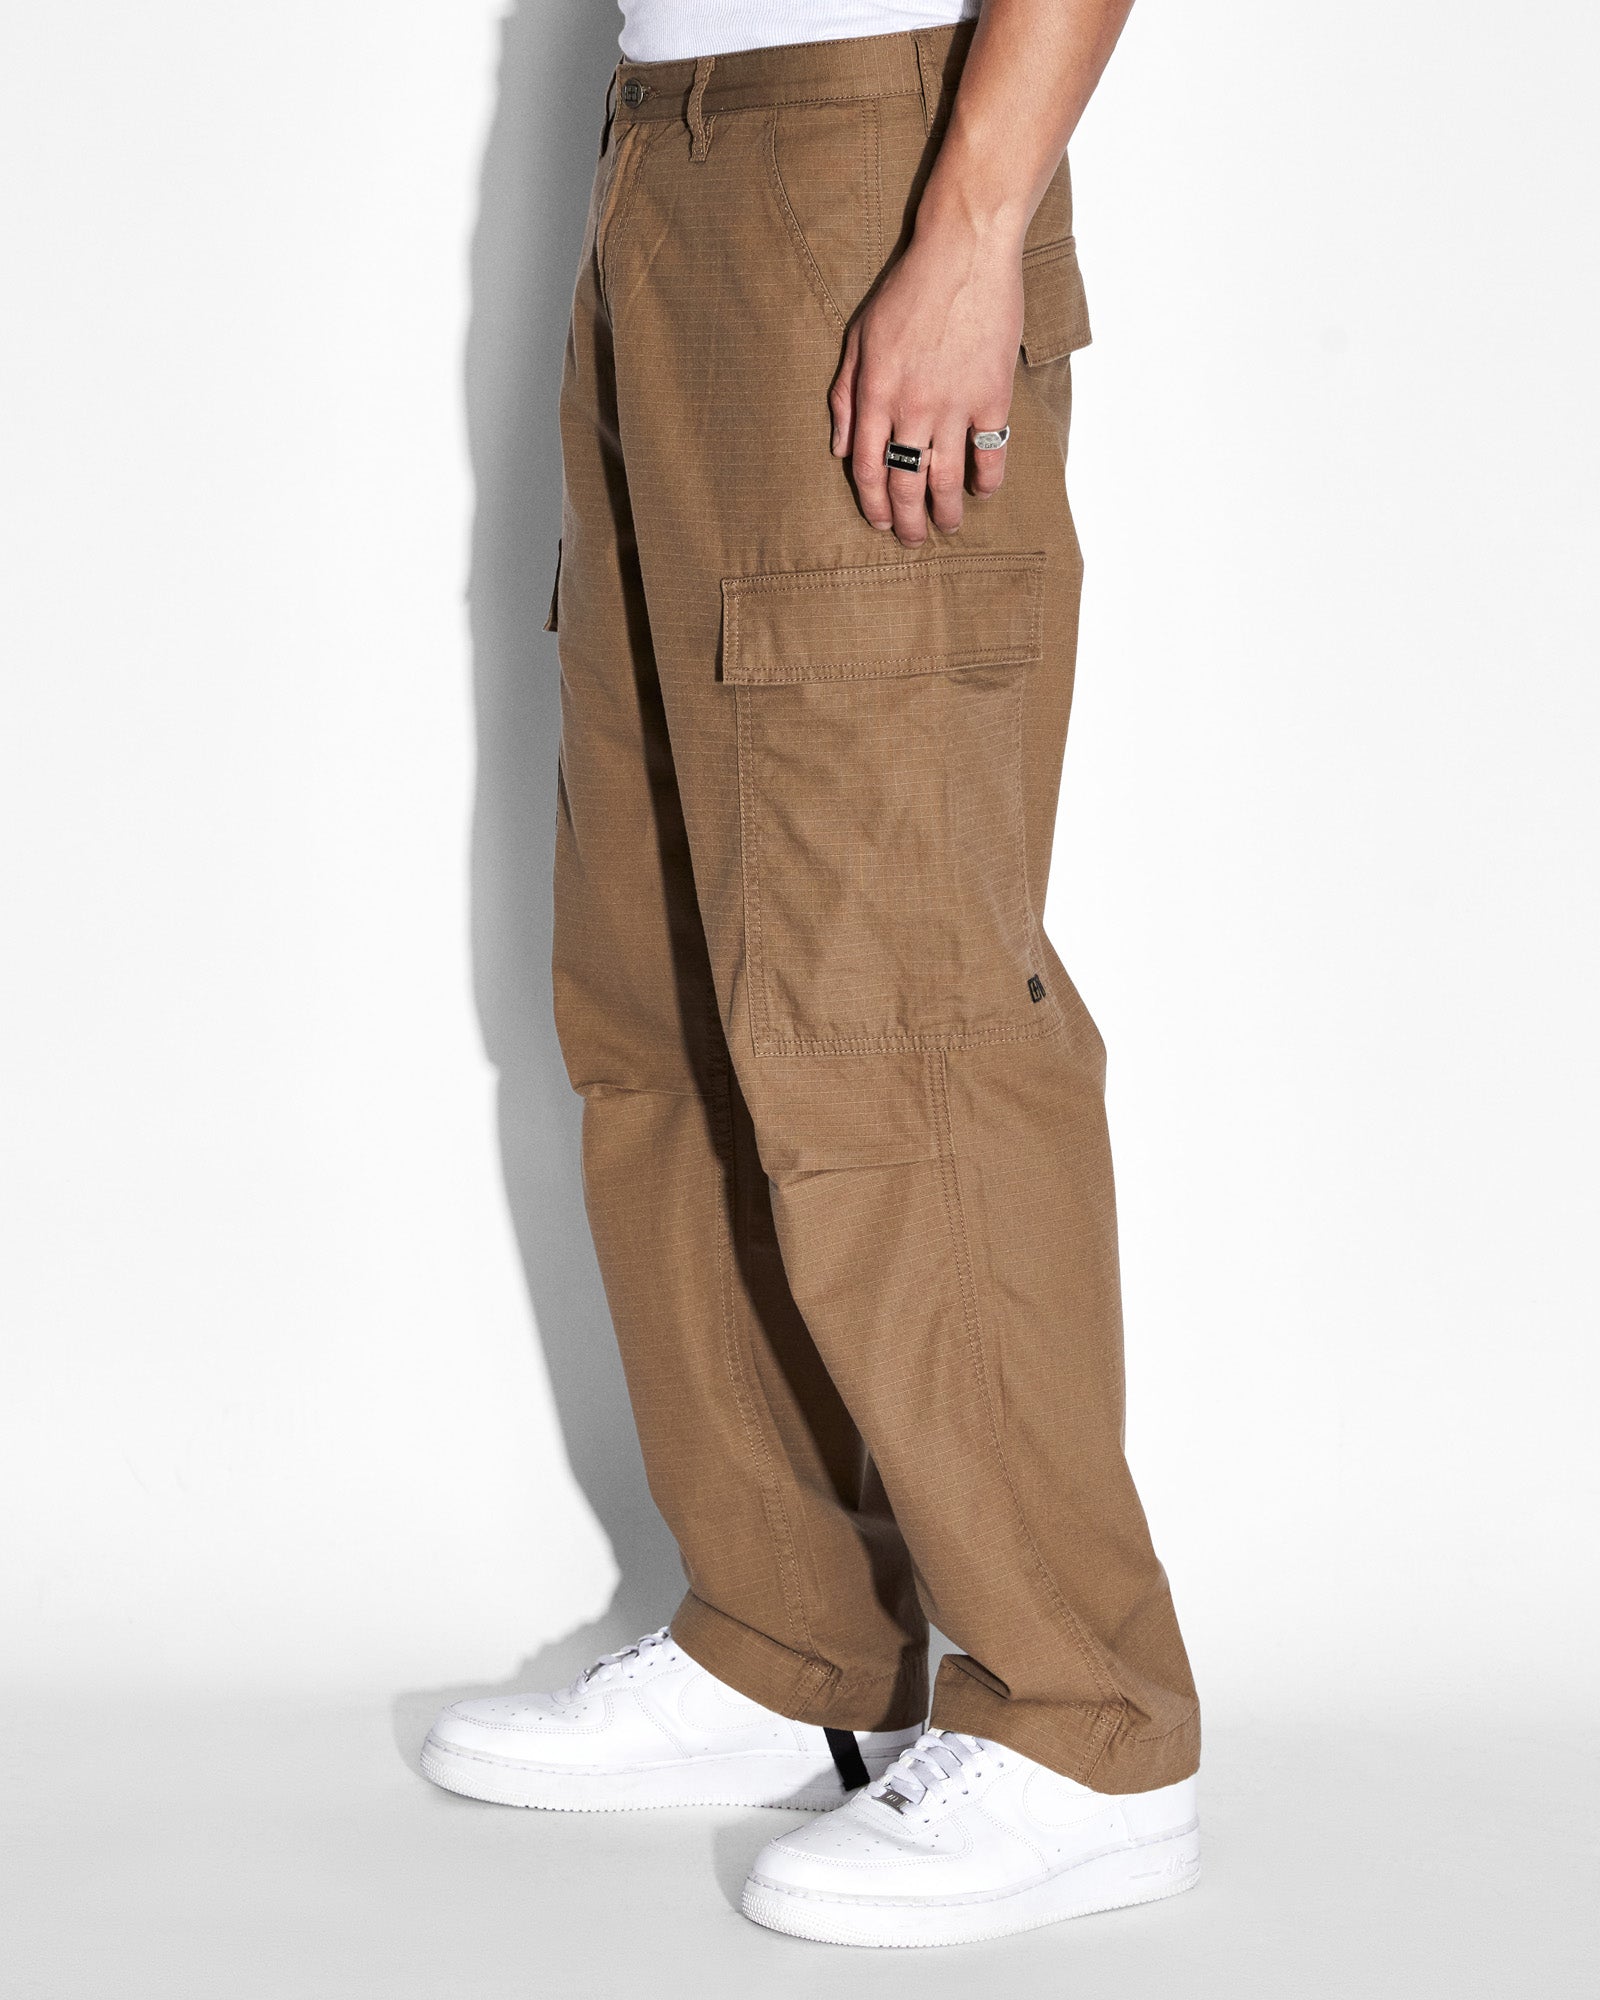 Buy Coated Ankle Zip Cargo Pocket Stacked Pant Men's Jeans & Pants from  Waimea. Find Waimea fashion & more at DrJays.com